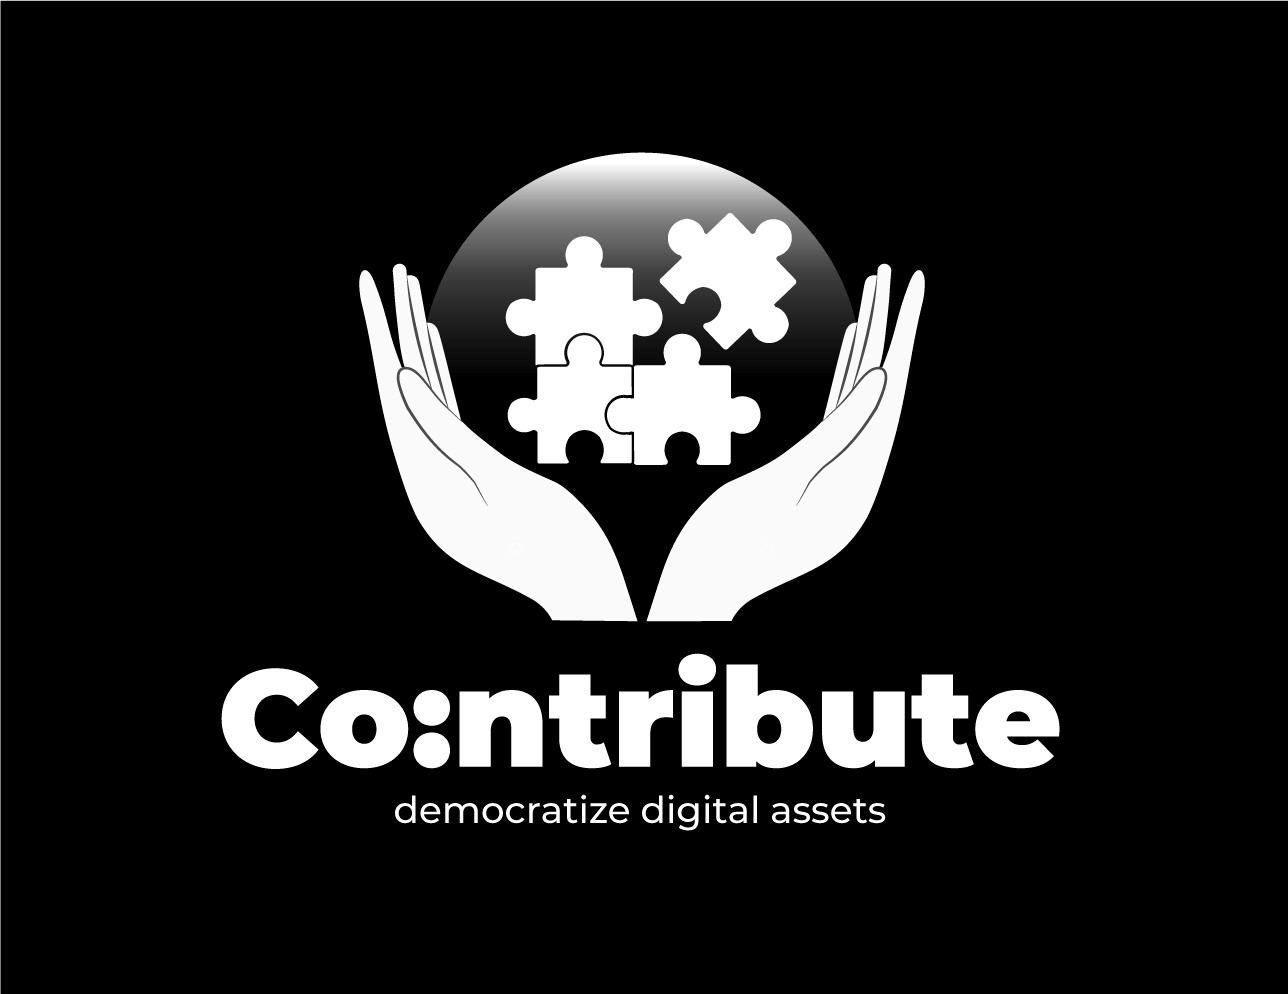 Co:ntribute - Tokenize, Fractionize, Govern: Collective ownership,Shared Benefits